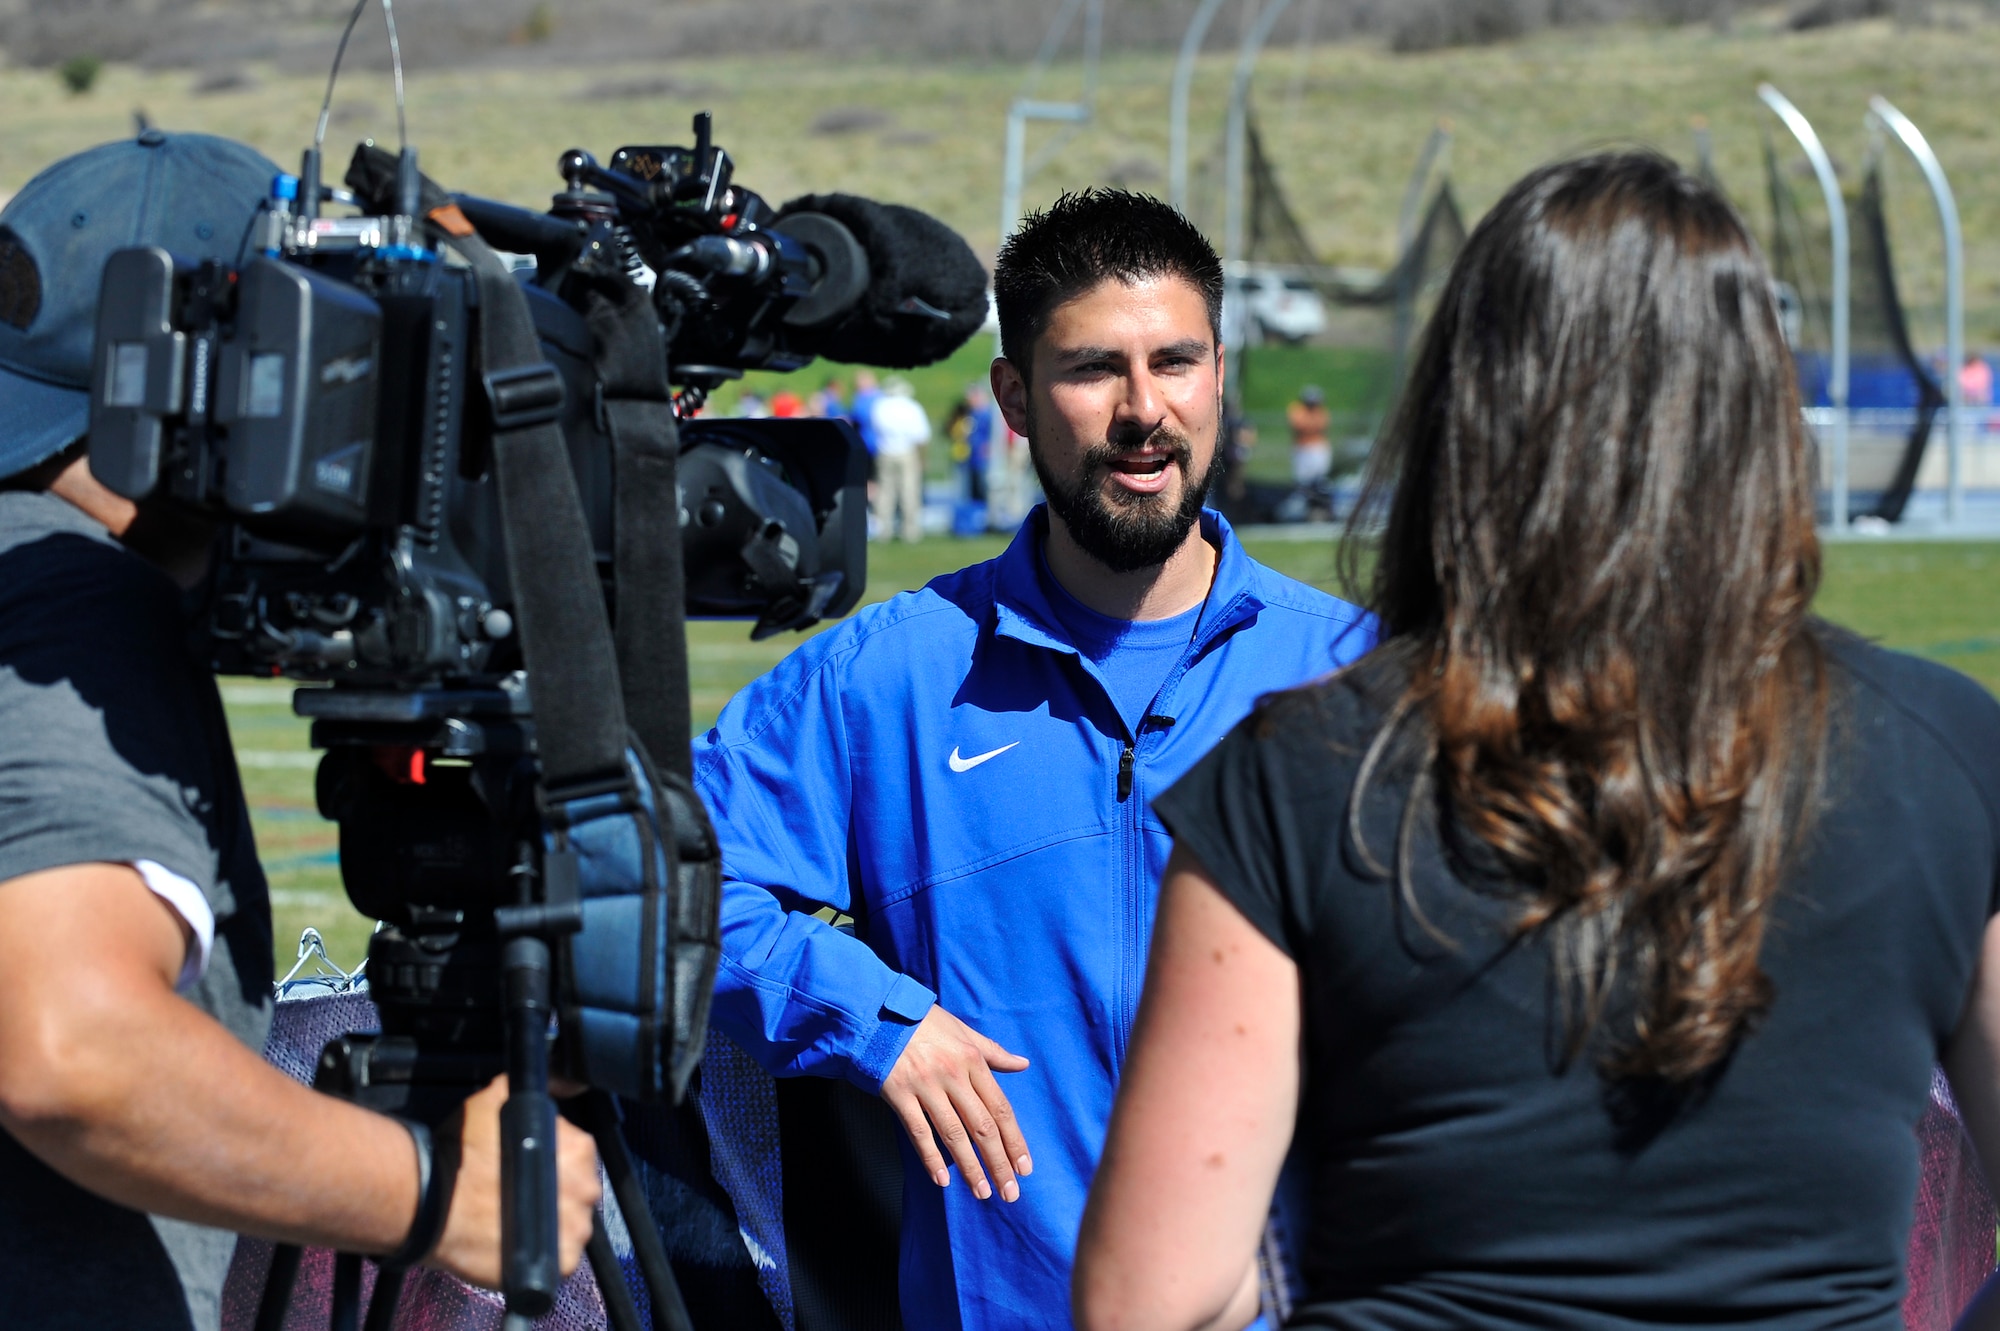 A CNN news team interviews prior Air Force Senior Airman Stephen Otero during the 2013 Warrior Games at the U.S. Air Force Academy May 14, Colorado Springs, Colo. Otero described how being able to compete in the games has changed his outlook on life and restored his sense of balance. (U.S. Air Force photo by Staff Sgt. Christopher Boitz/Released)